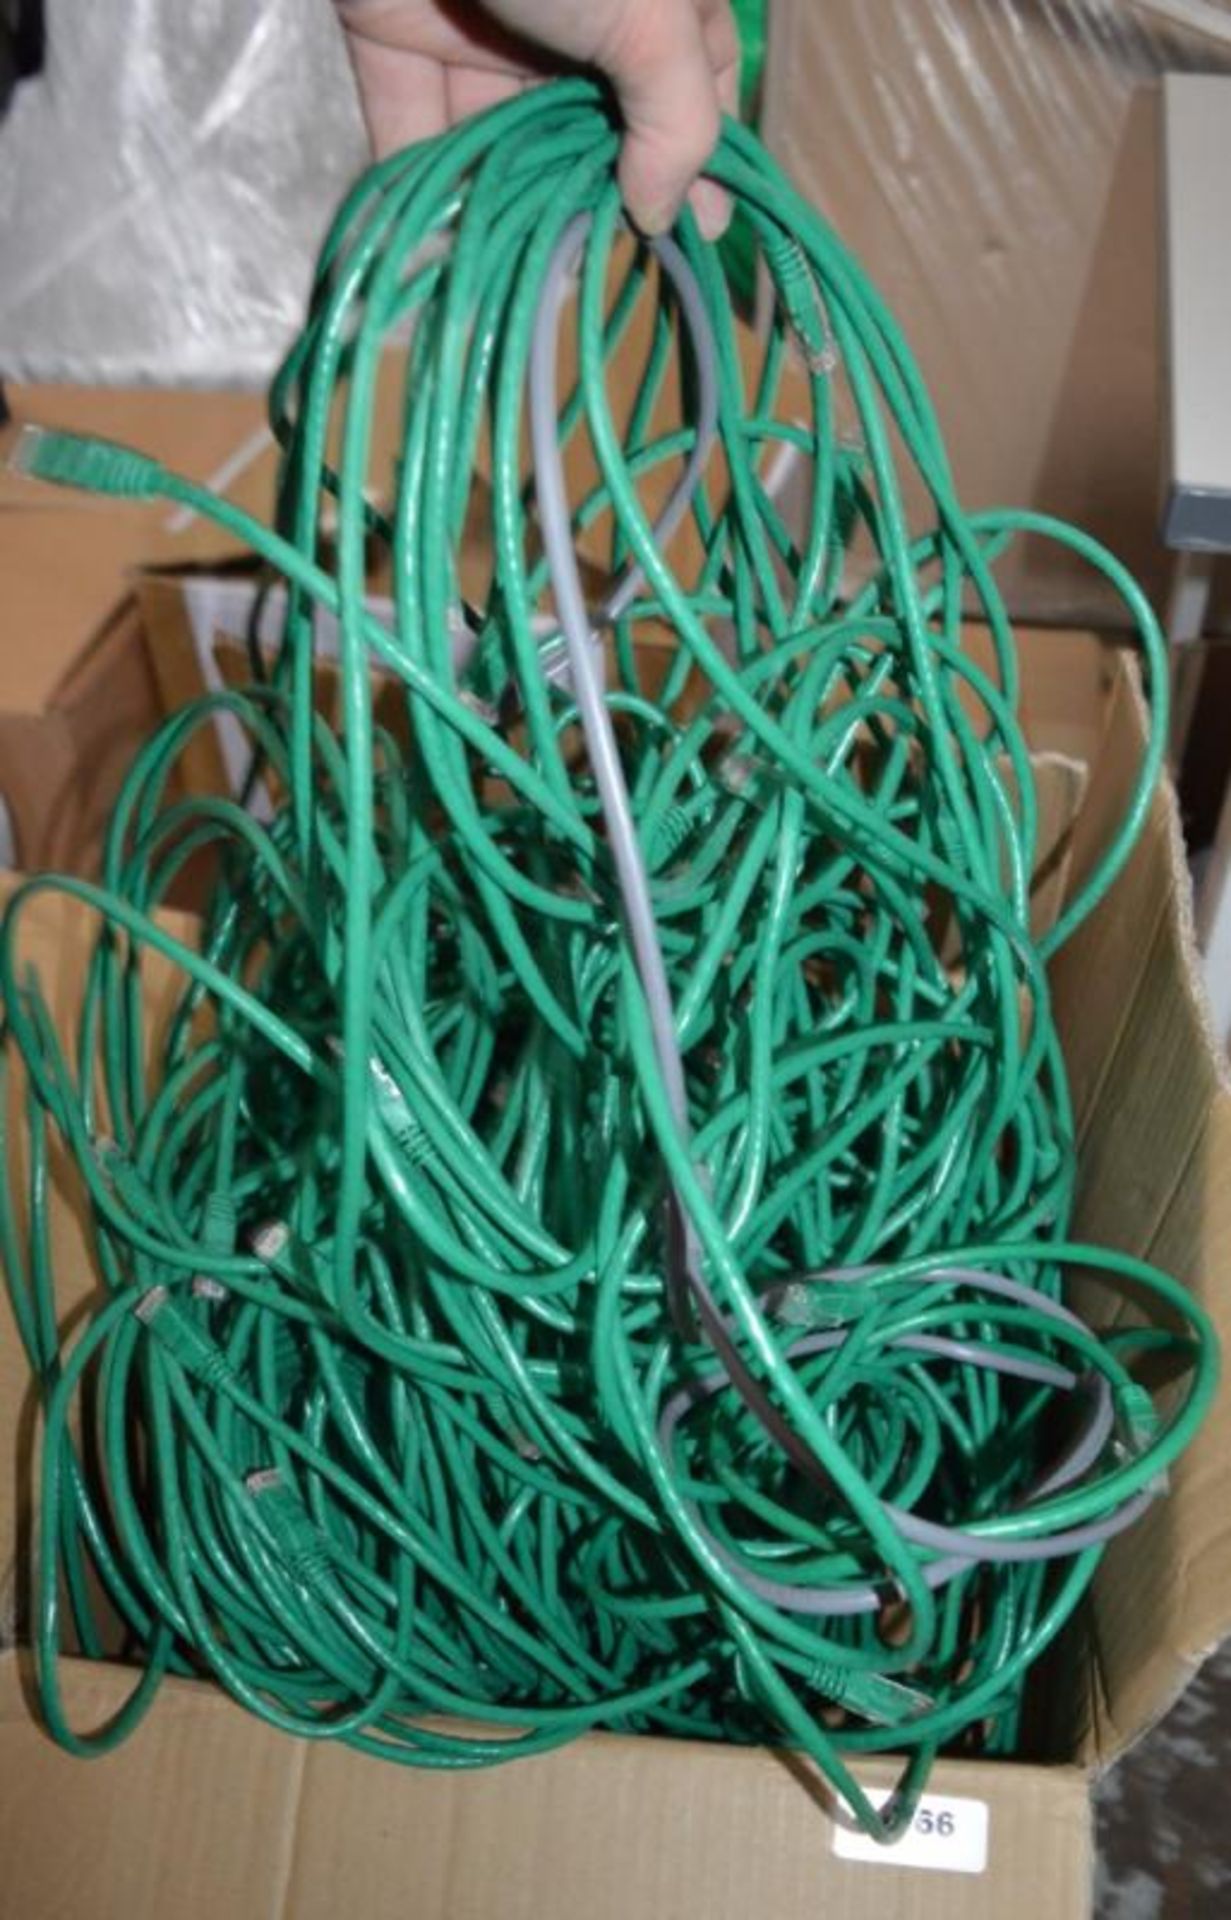 1 x Quantity of Network Patch Cables - CL249 - Ref J766 - Location: Altirncham WA14 - Image 2 of 2